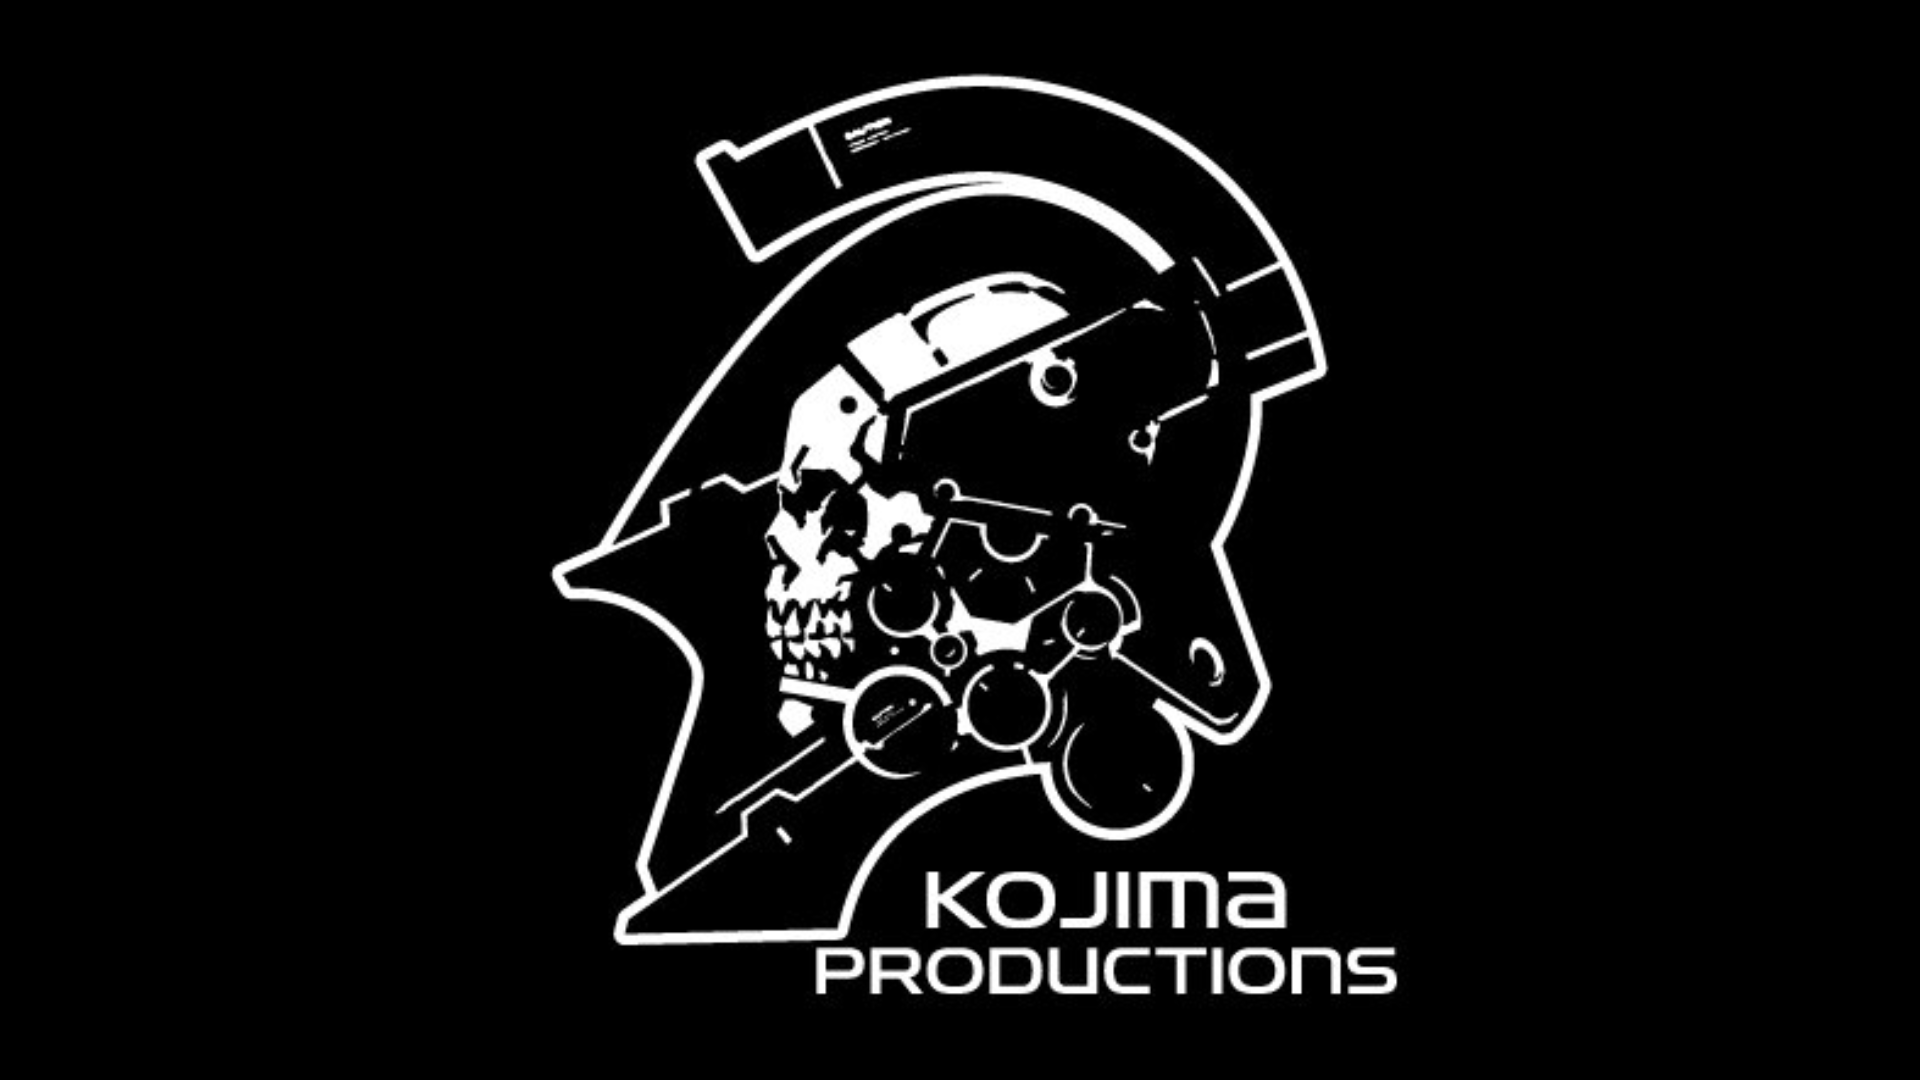 Is Kojima Productions Teasing A Big Announcement?